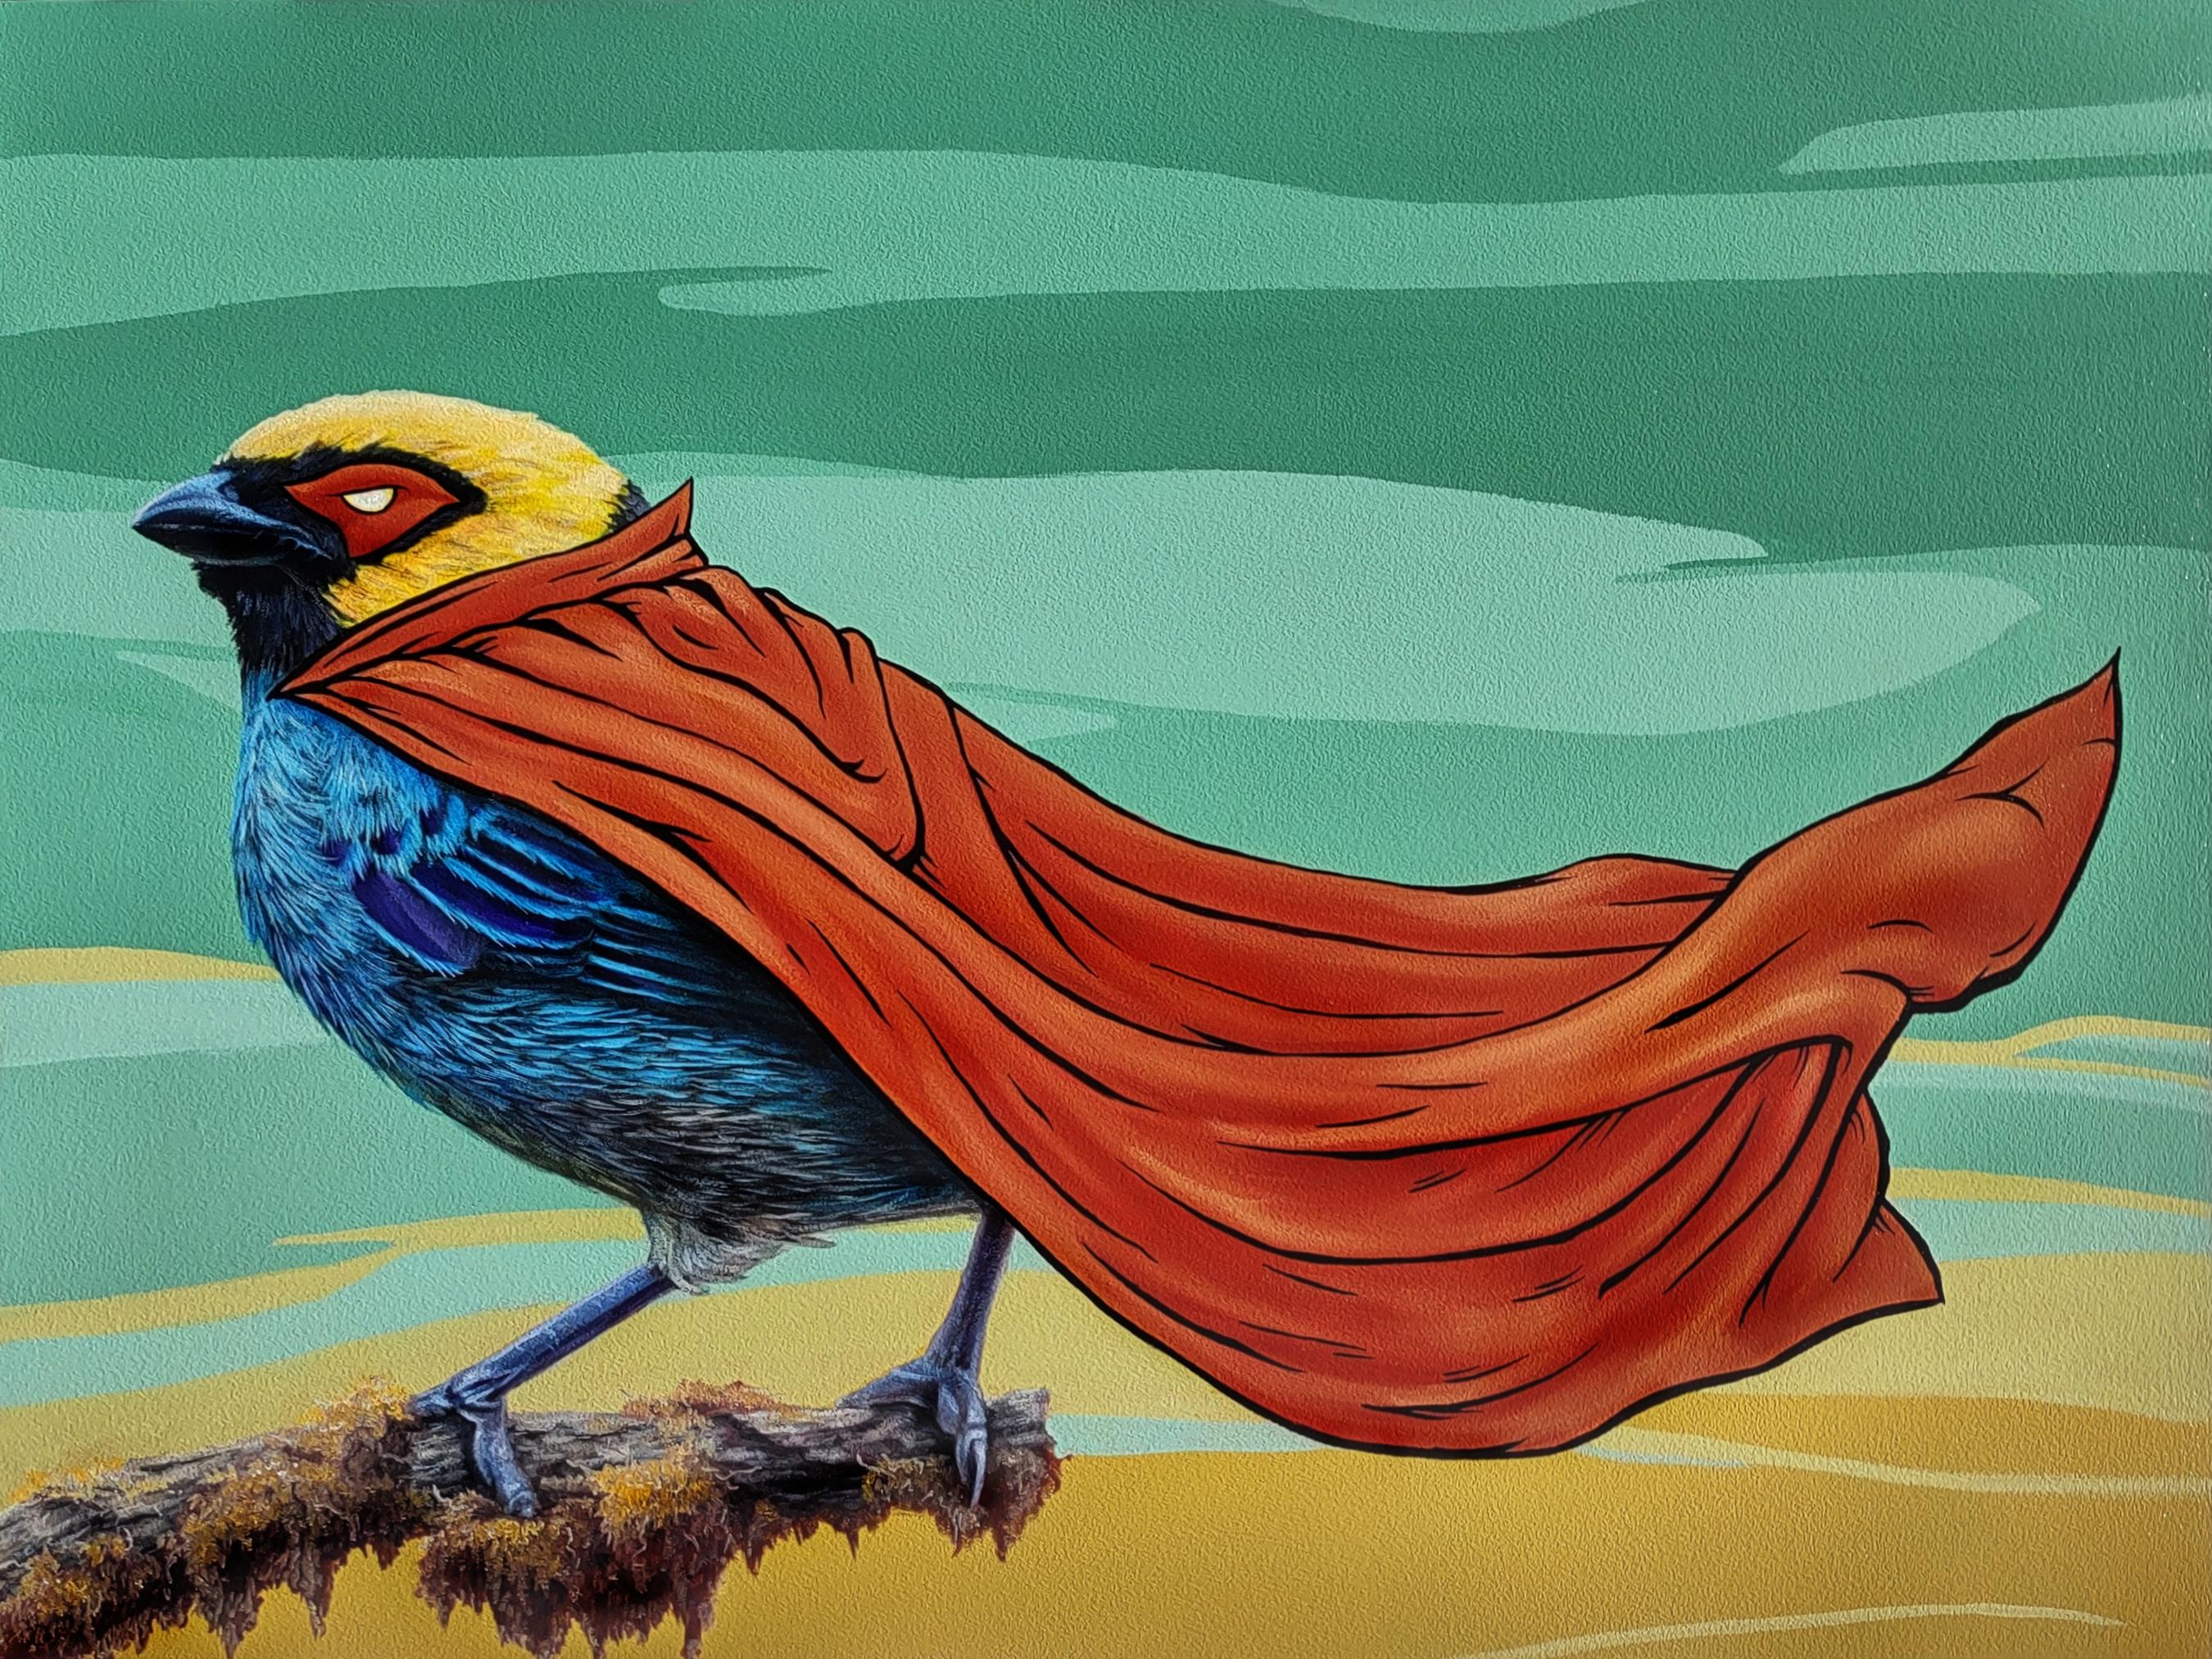 3rd Version (Ben Patterson) Animal Painting - "Masks We Wear, For Anonymity", Bird with Red Cape Oil Painting